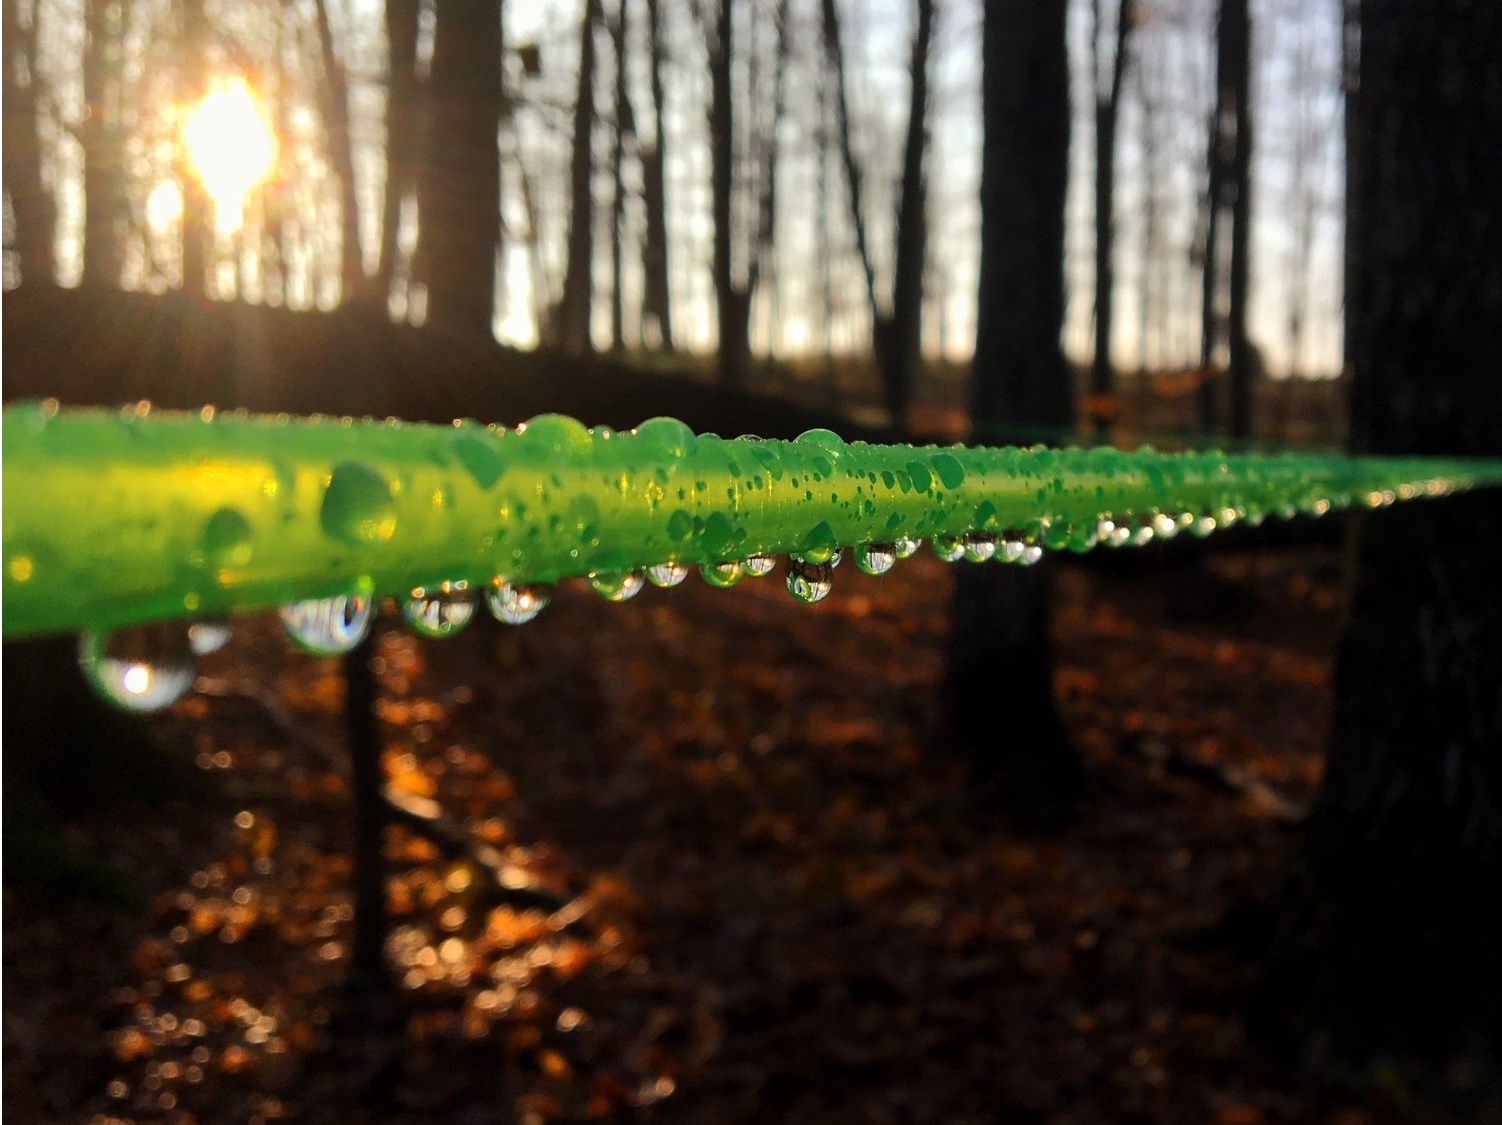 close up view of green plastic maple sap collection line strung between two maple trees, line has beads of water running the length